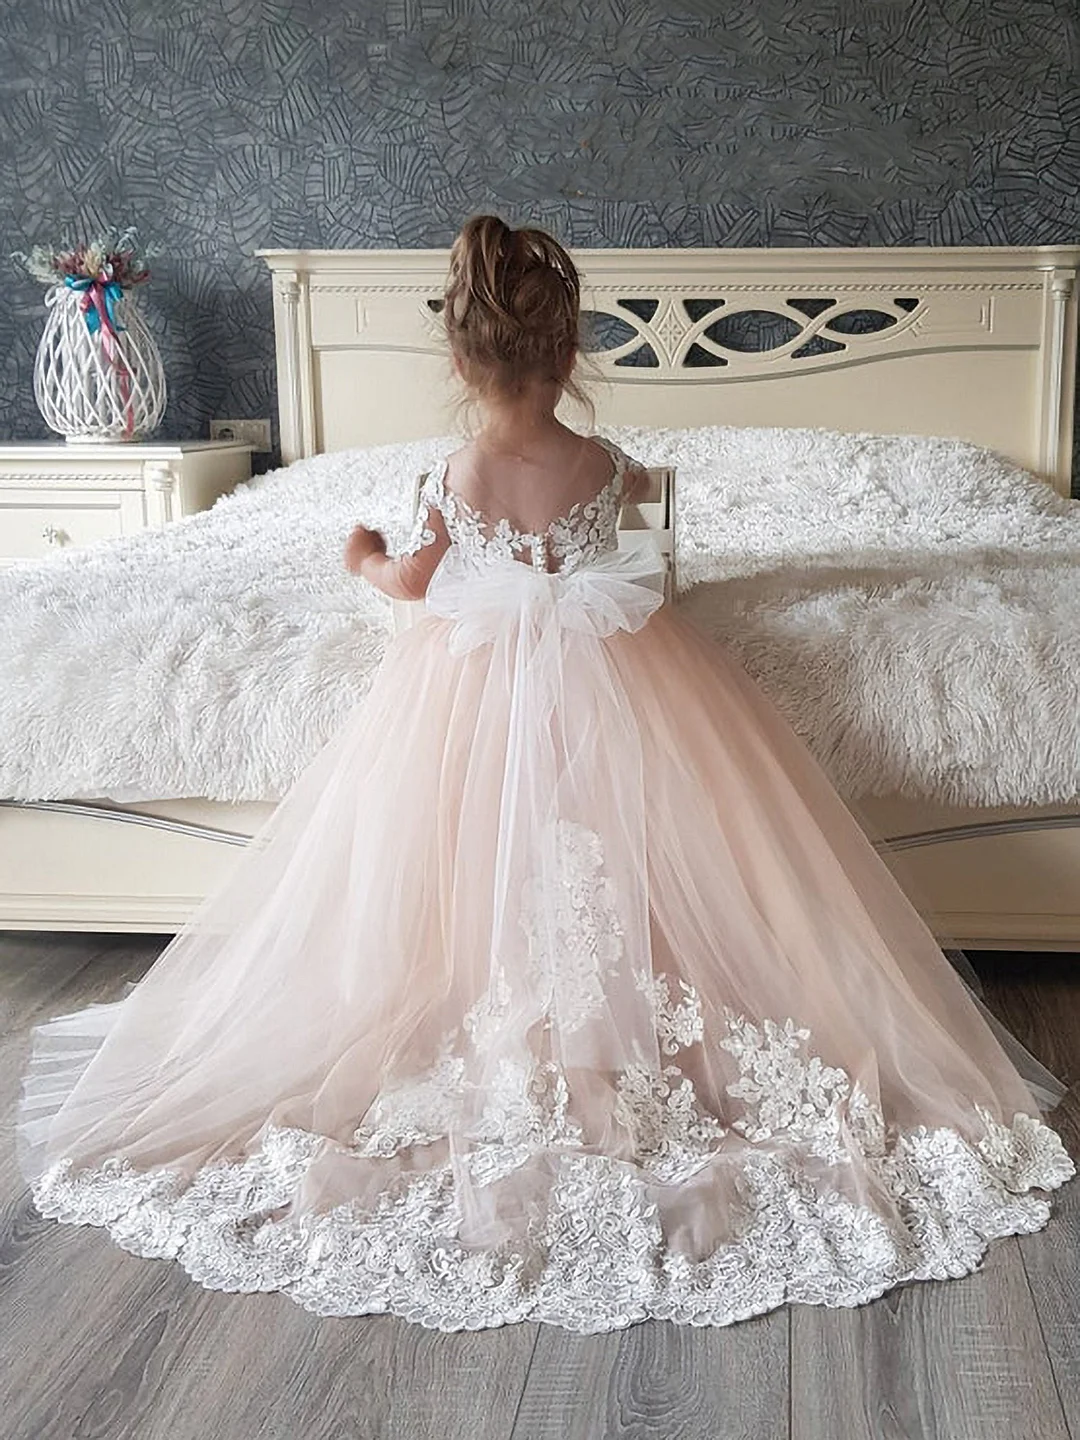 Daisda Cute Boho Half-Sleeves Flower Girl Dresses Tulle Lace with Appliques Bow